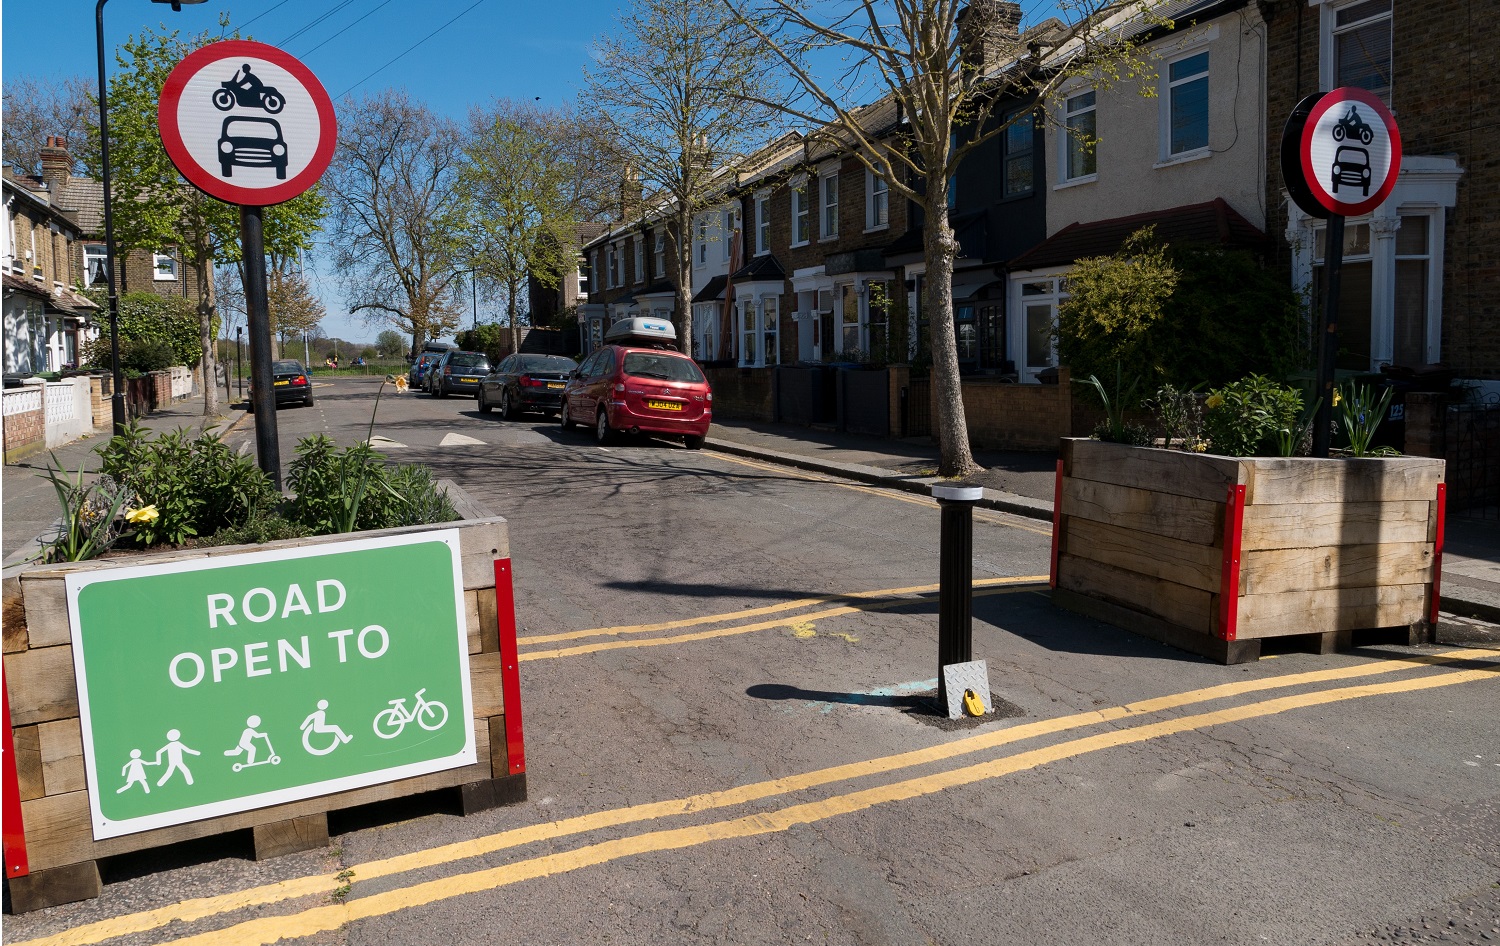 An example of a low traffic neighbourhood with traffic bollards and signage supporting cycle through routes